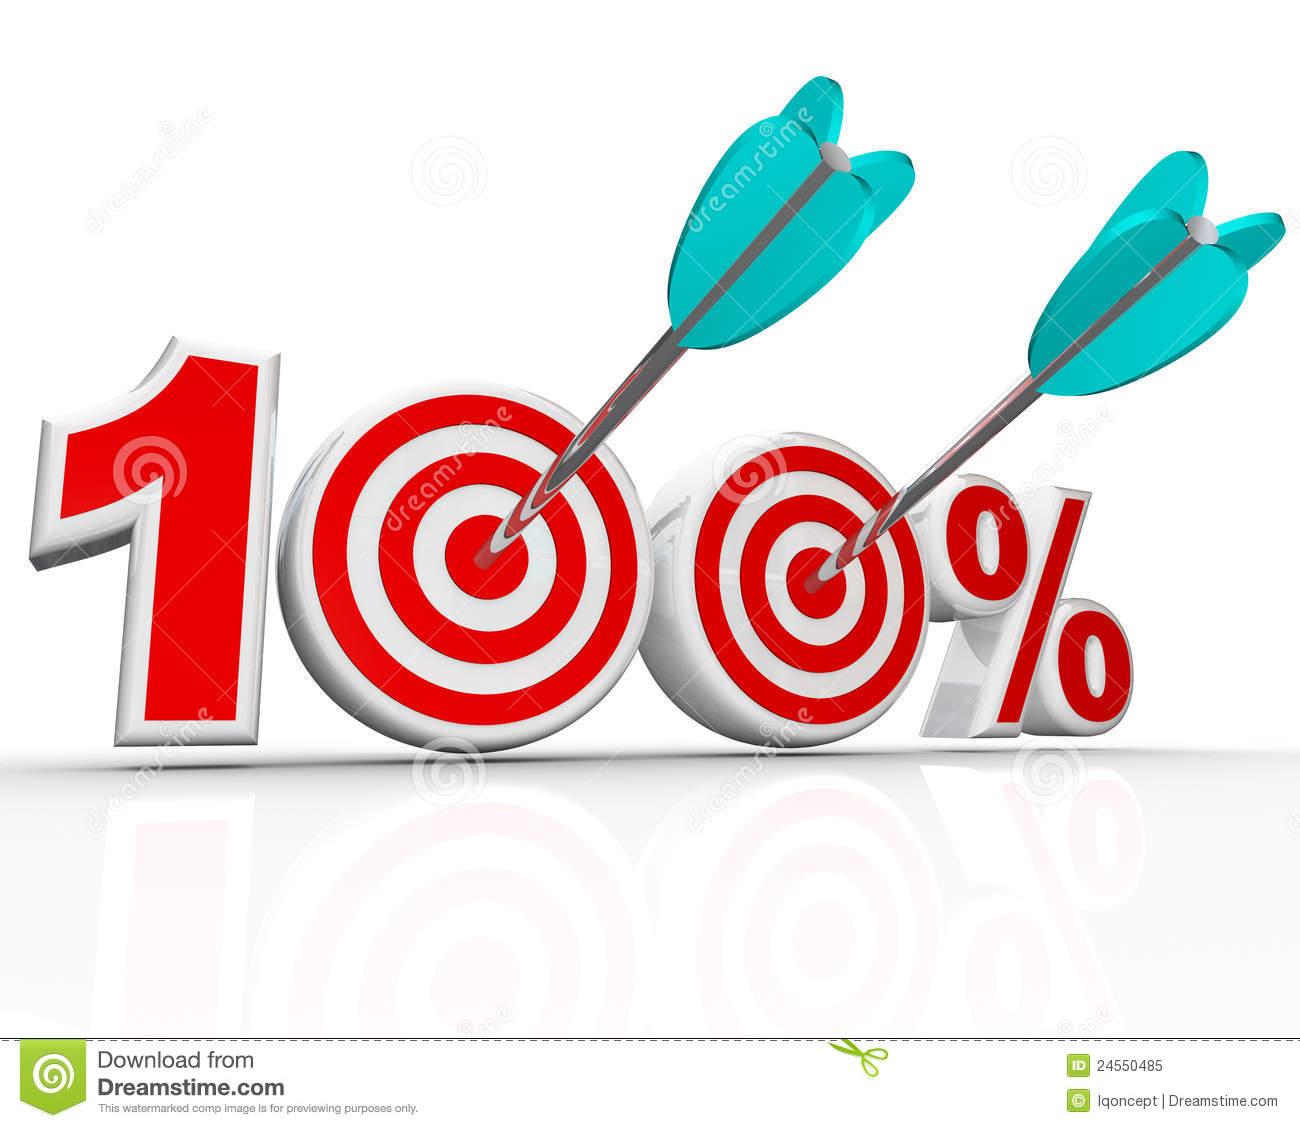 The Number 100 Percent With Arrows Shooting Into The Bulls Eye Targets